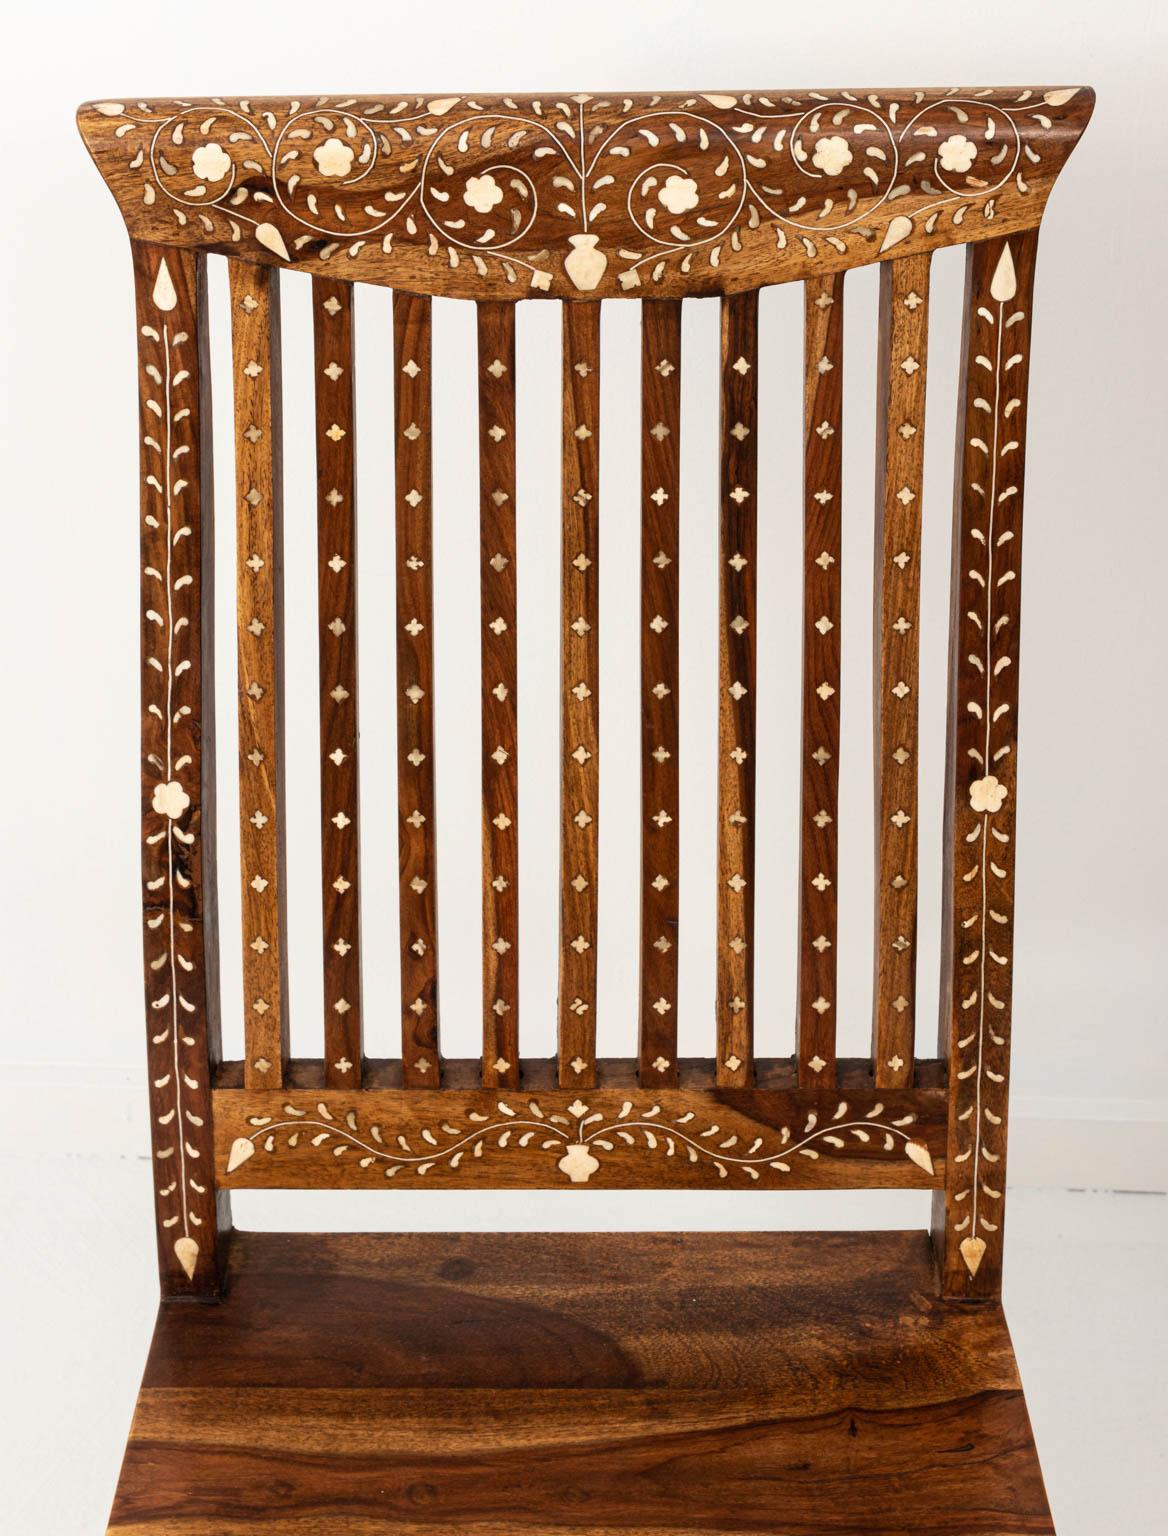 Set of Eight Walnut and Bone Inlaid Dining Room Chairs In Good Condition For Sale In Stamford, CT